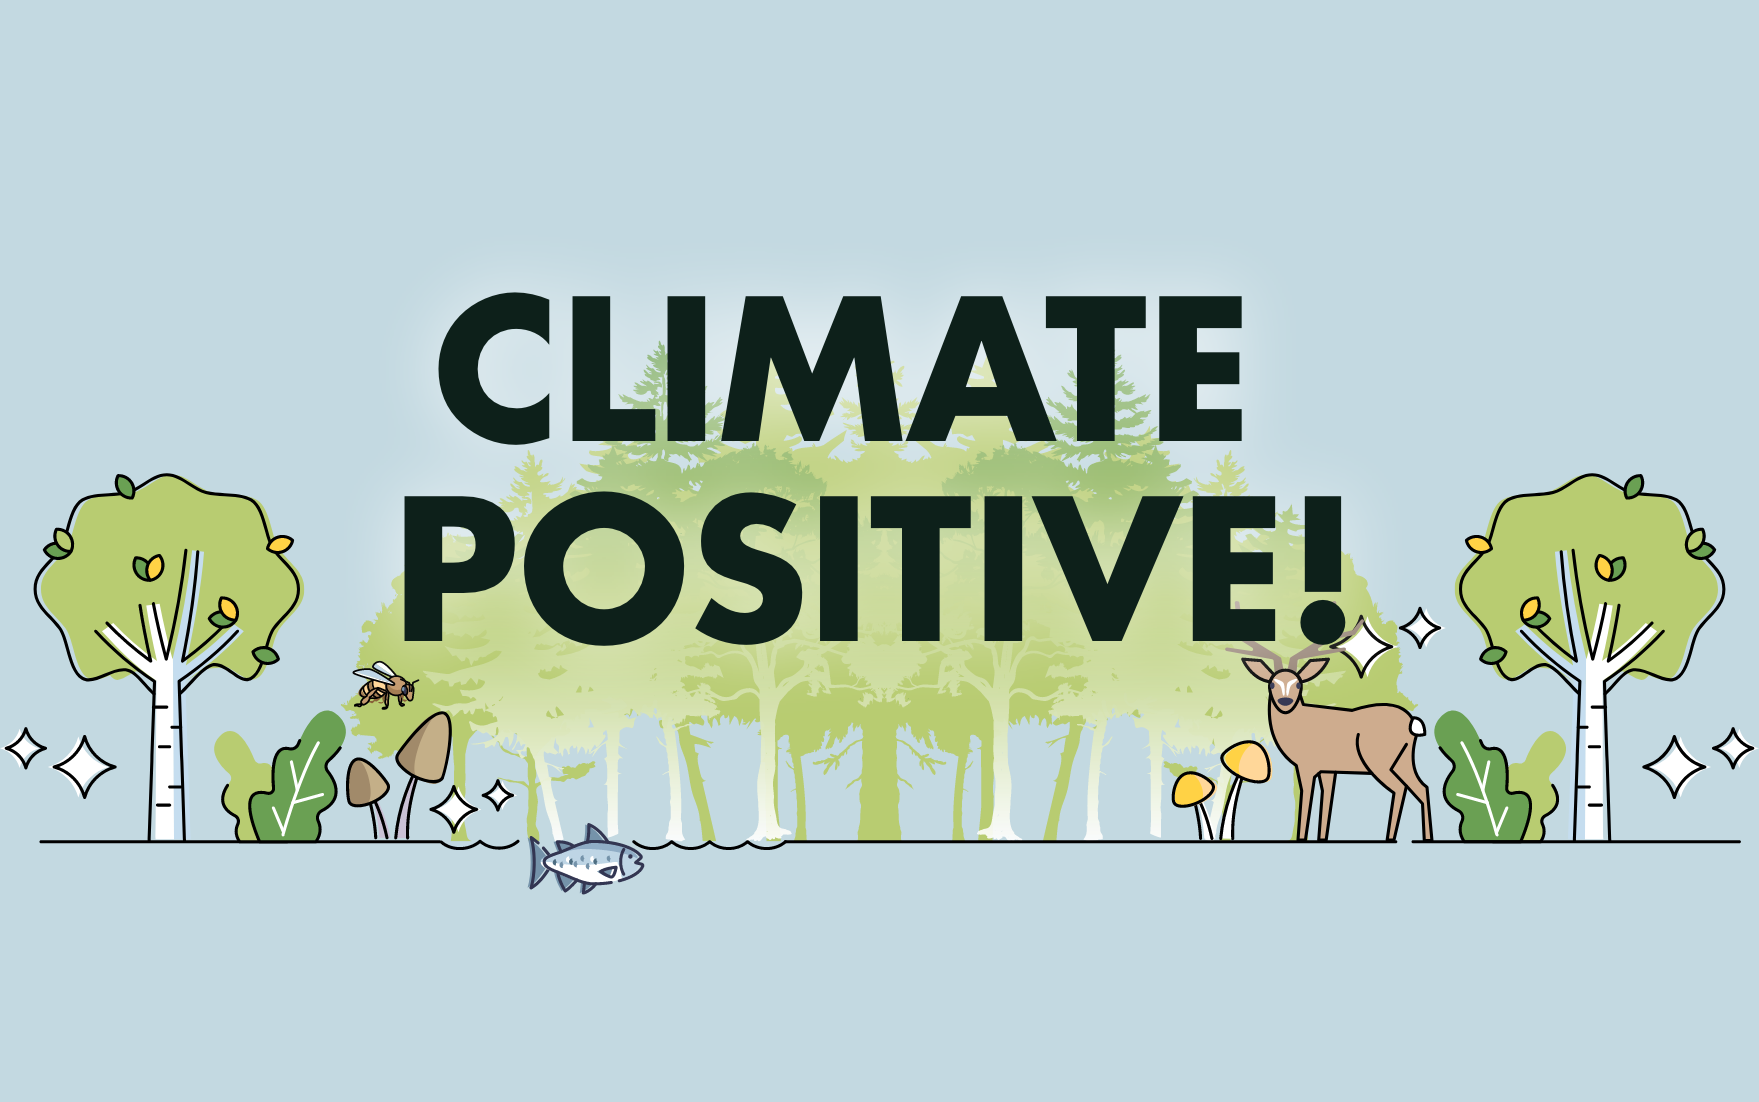 We’re Climate Positive